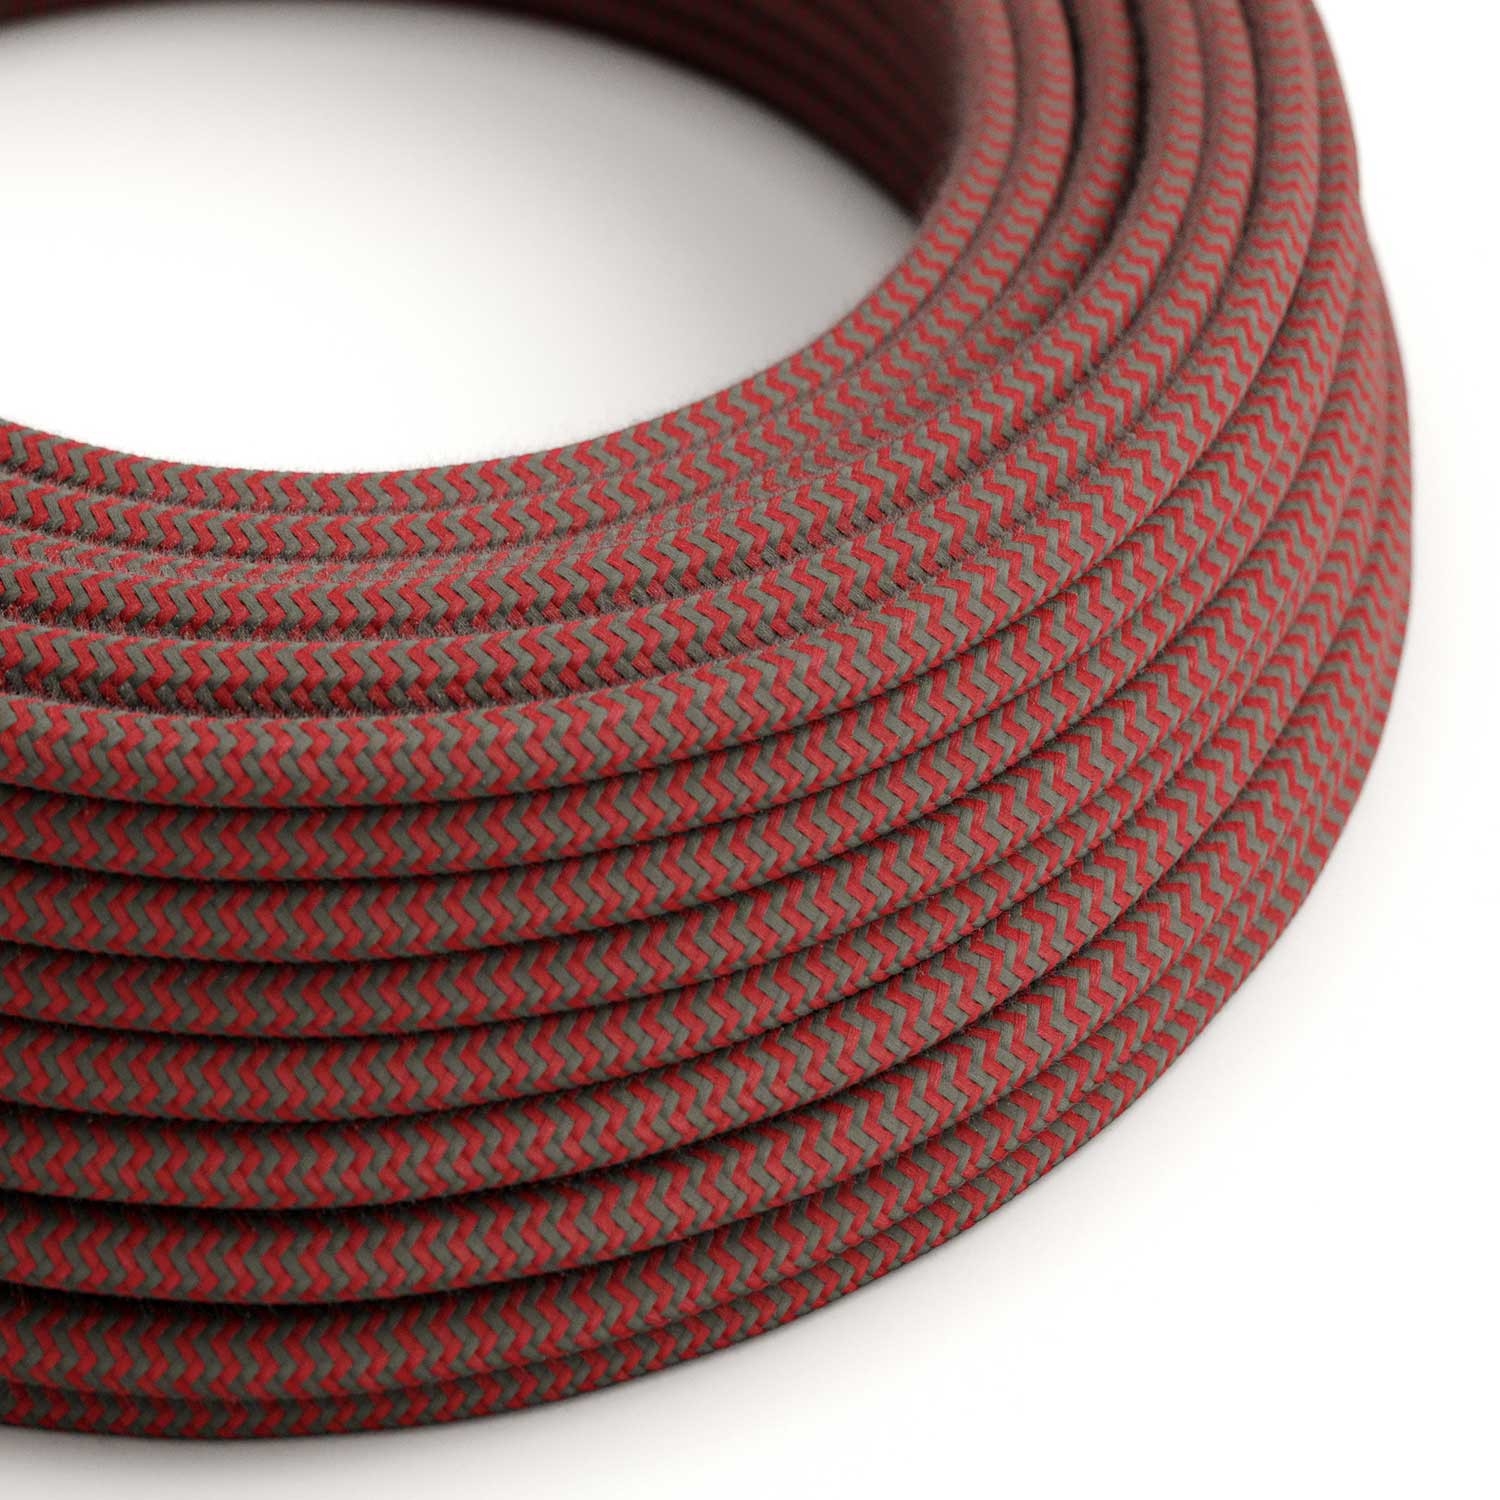 RZ28 ZigZag Fire Red & Grey Round Cotton Electrical Fabric Cloth Cord Cable